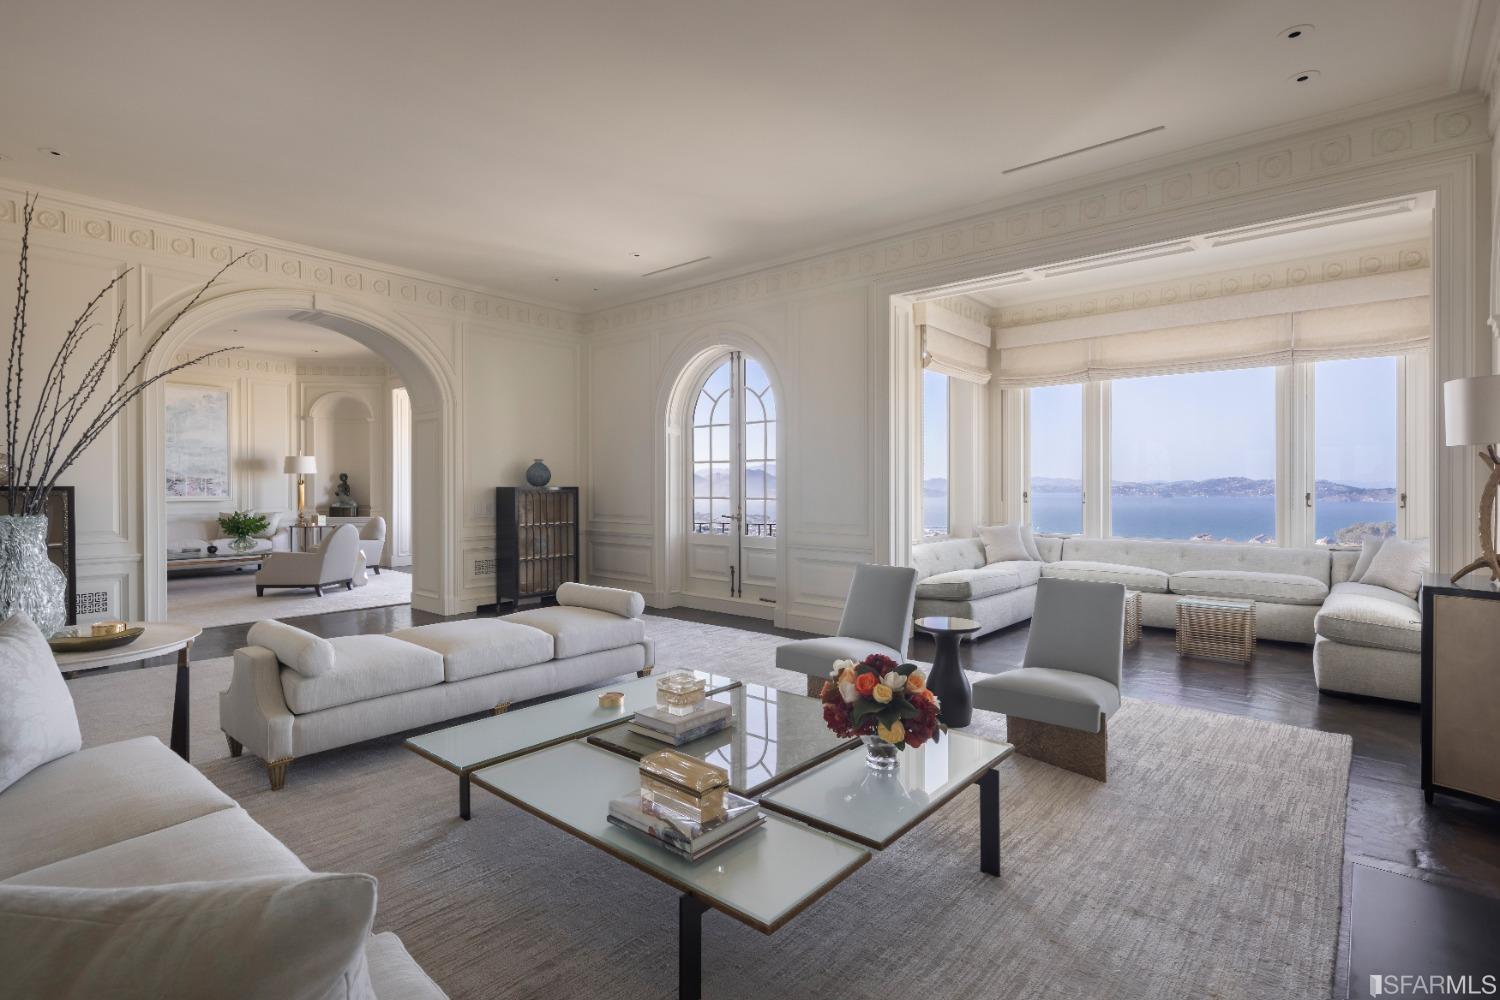 ***Now Reduced $5,000,000*** One of only two pre-war duplex penthouses in Pacific Heights, #7 at 2000 Washington boasts a striking panorama of the San Francisco Bay, from Golden Gate to Alcatraz to Russian Hill.    Designed by architect Andrew Skurman, whose design for the Penthouse received the Julia Morgan Award from the Institute of Classical Architecture & Arts, the residence is distinguished by a sweeping suite of grand yet elegant entertaining rooms from entrance gallery to living room, family room, expansive kitchen & formal dining room. White fluted pilasters, rosettes, high ceilings, and arches in enfilade make a definitively classical statement, yet convey a modern feeling of openness.    An opulent primary suite complements three guest bedrooms, each with luxurious marble baths. A curvilinear staircase ascends to the upper-level at-home office or media room with soaring ceilings, a wet bar, powder bath, fitness room and large, landscaped North Bay view terrace.    Advanced smart-home infrastructure includes Savant technology as well as air-conditioning. Residents enjoy two-car parking, an attended lobby, and professional residential management.